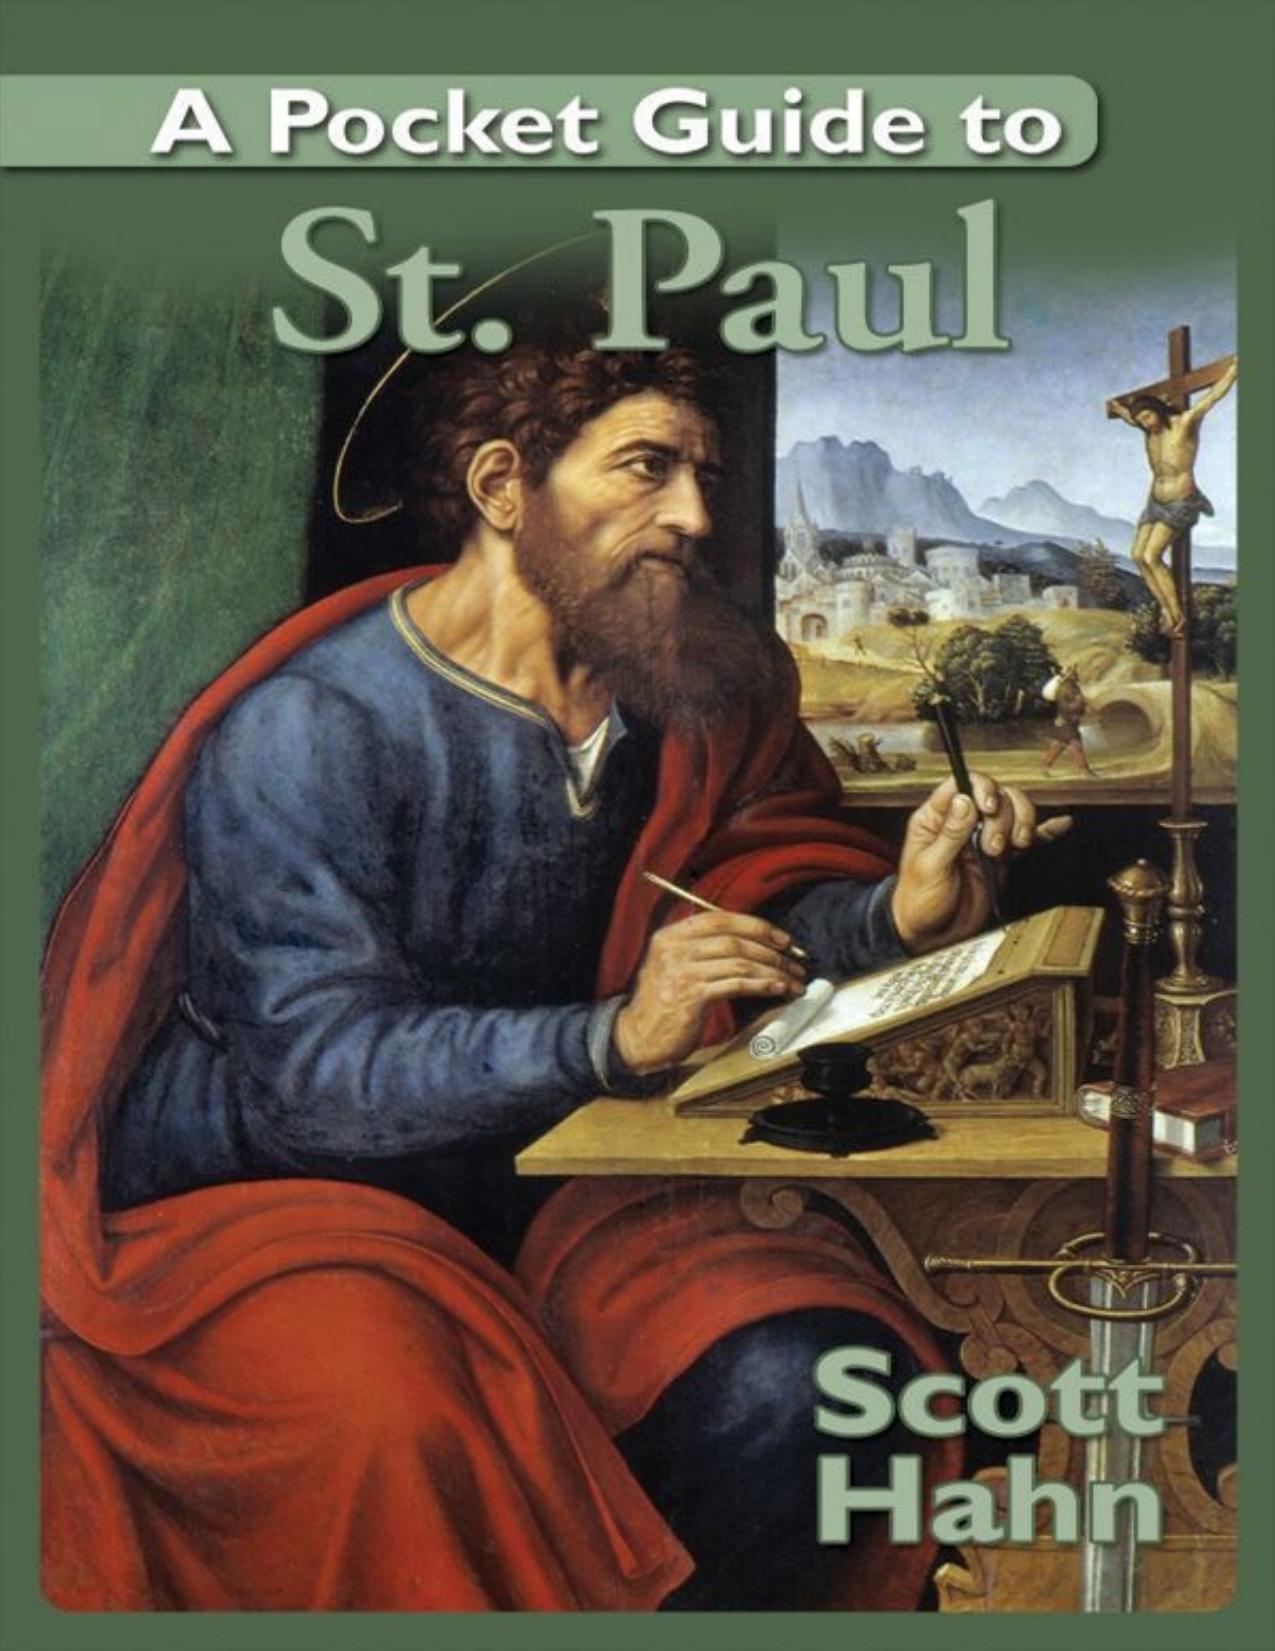 A Pocket Guide to St. Paul by Scott Hahn